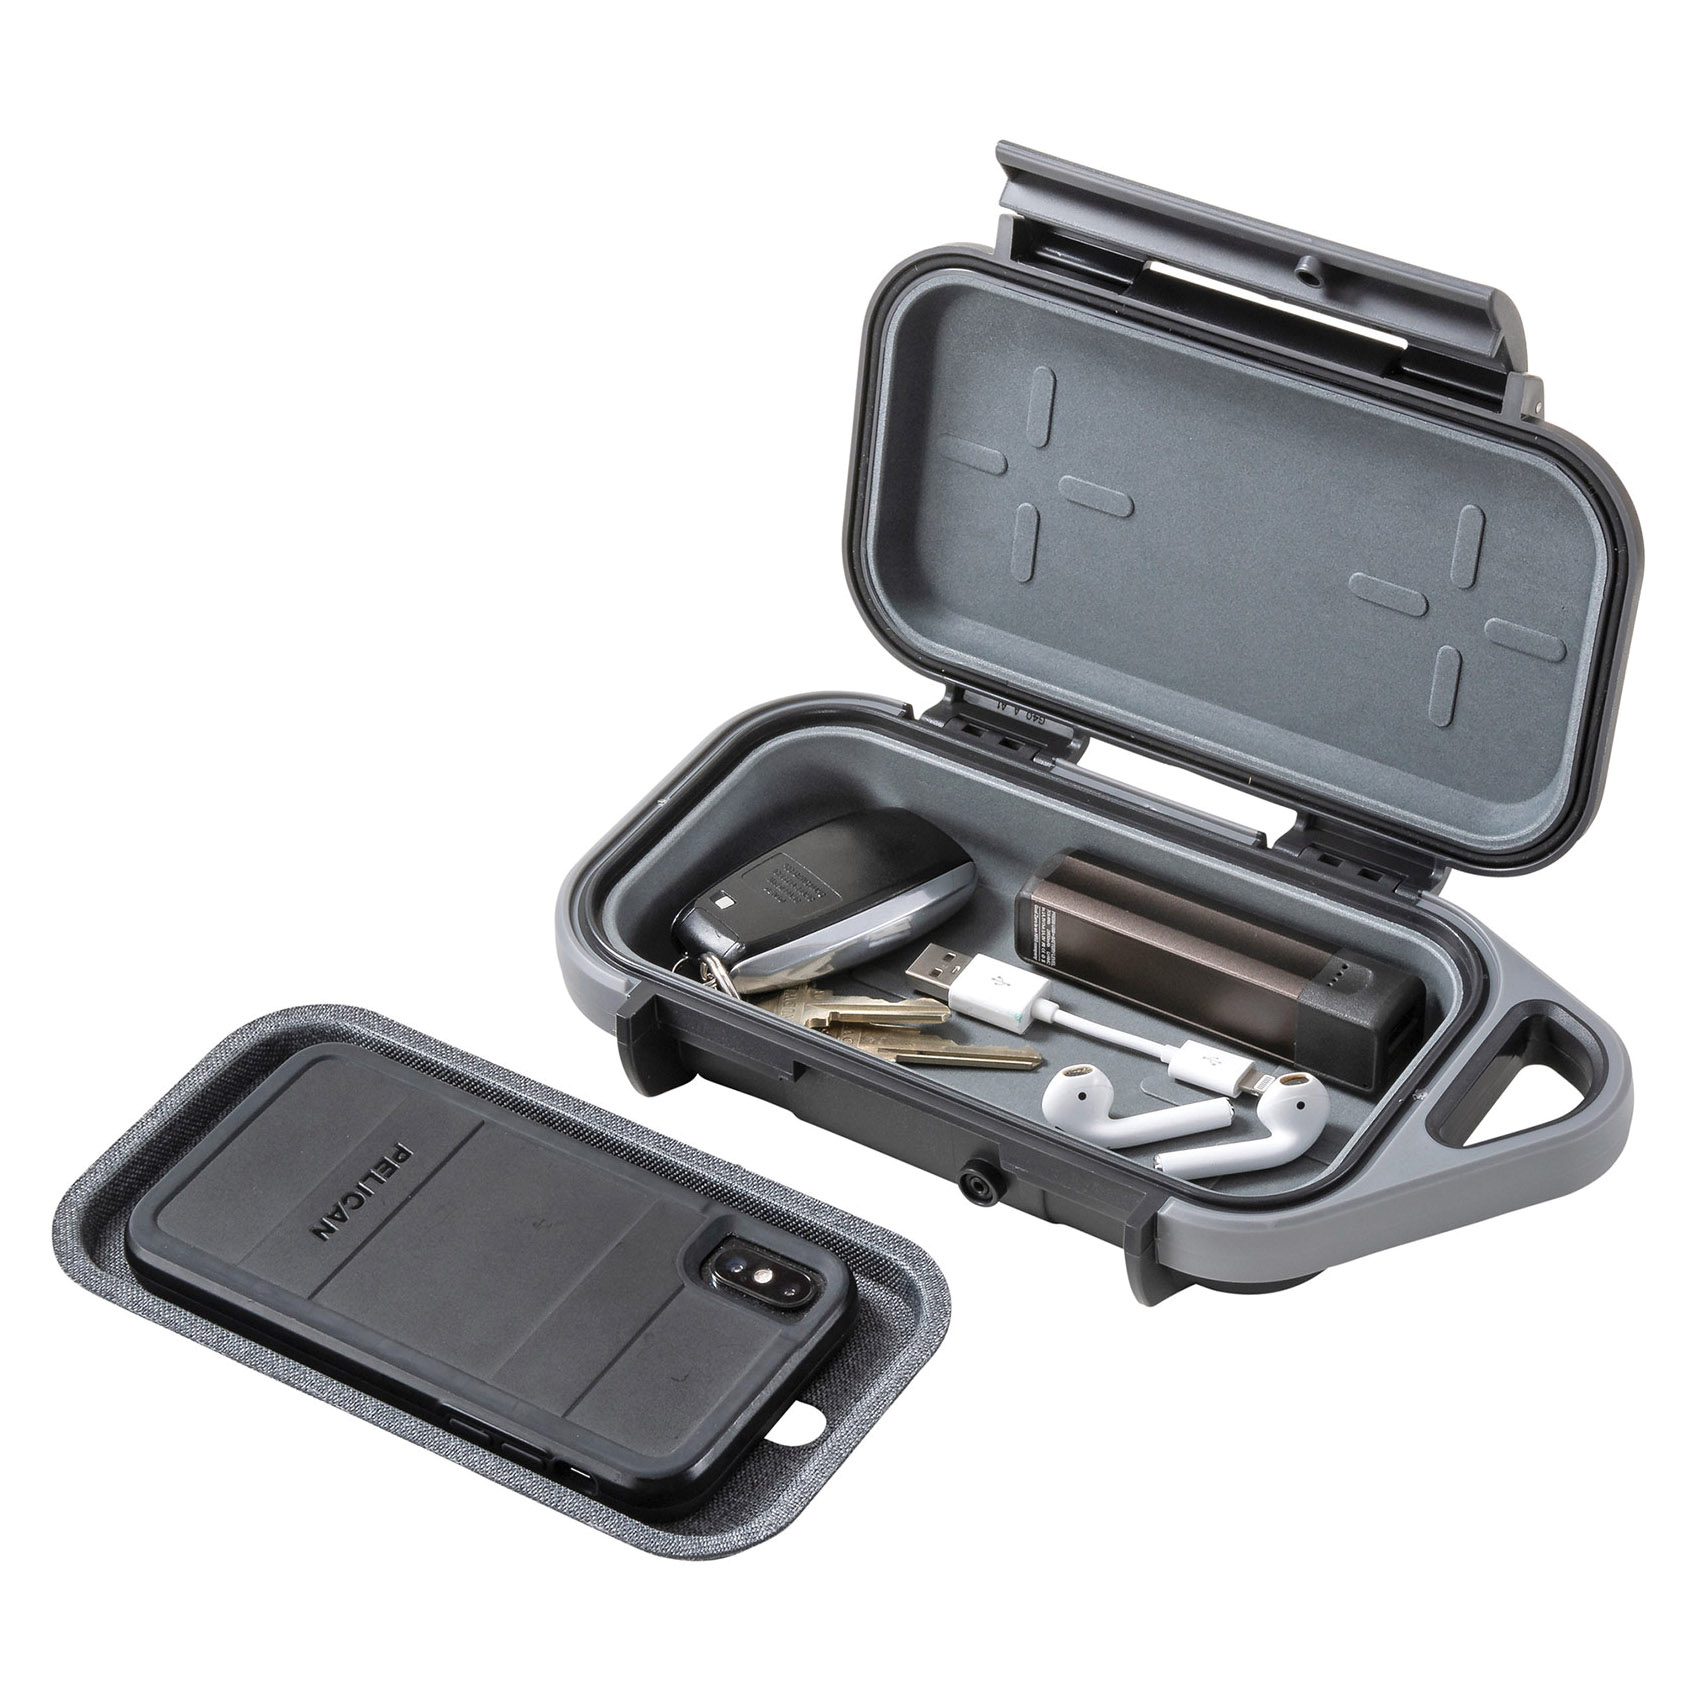 Pelican G40 Series GOG400-DGRY Personal Utility Case, ABS, Anthracite/Gray, For: iPhone Xs Max, Samsung Note 9 - 4